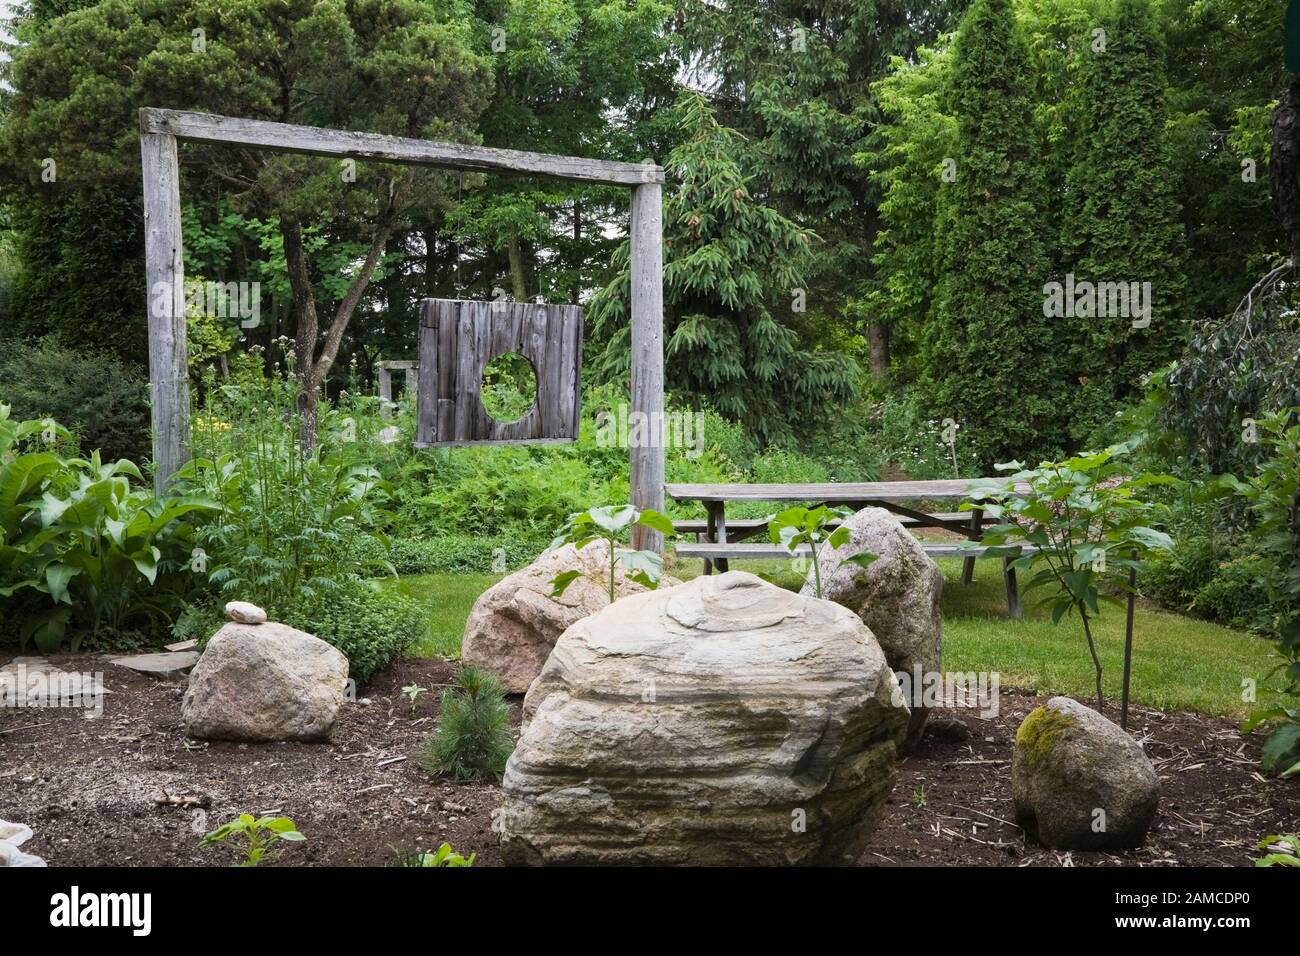 Decorative rocks and border planted with Pinus - Pine tree in private backyard garden in summer, old weathered wooden arbour structure in background. Stock Photo